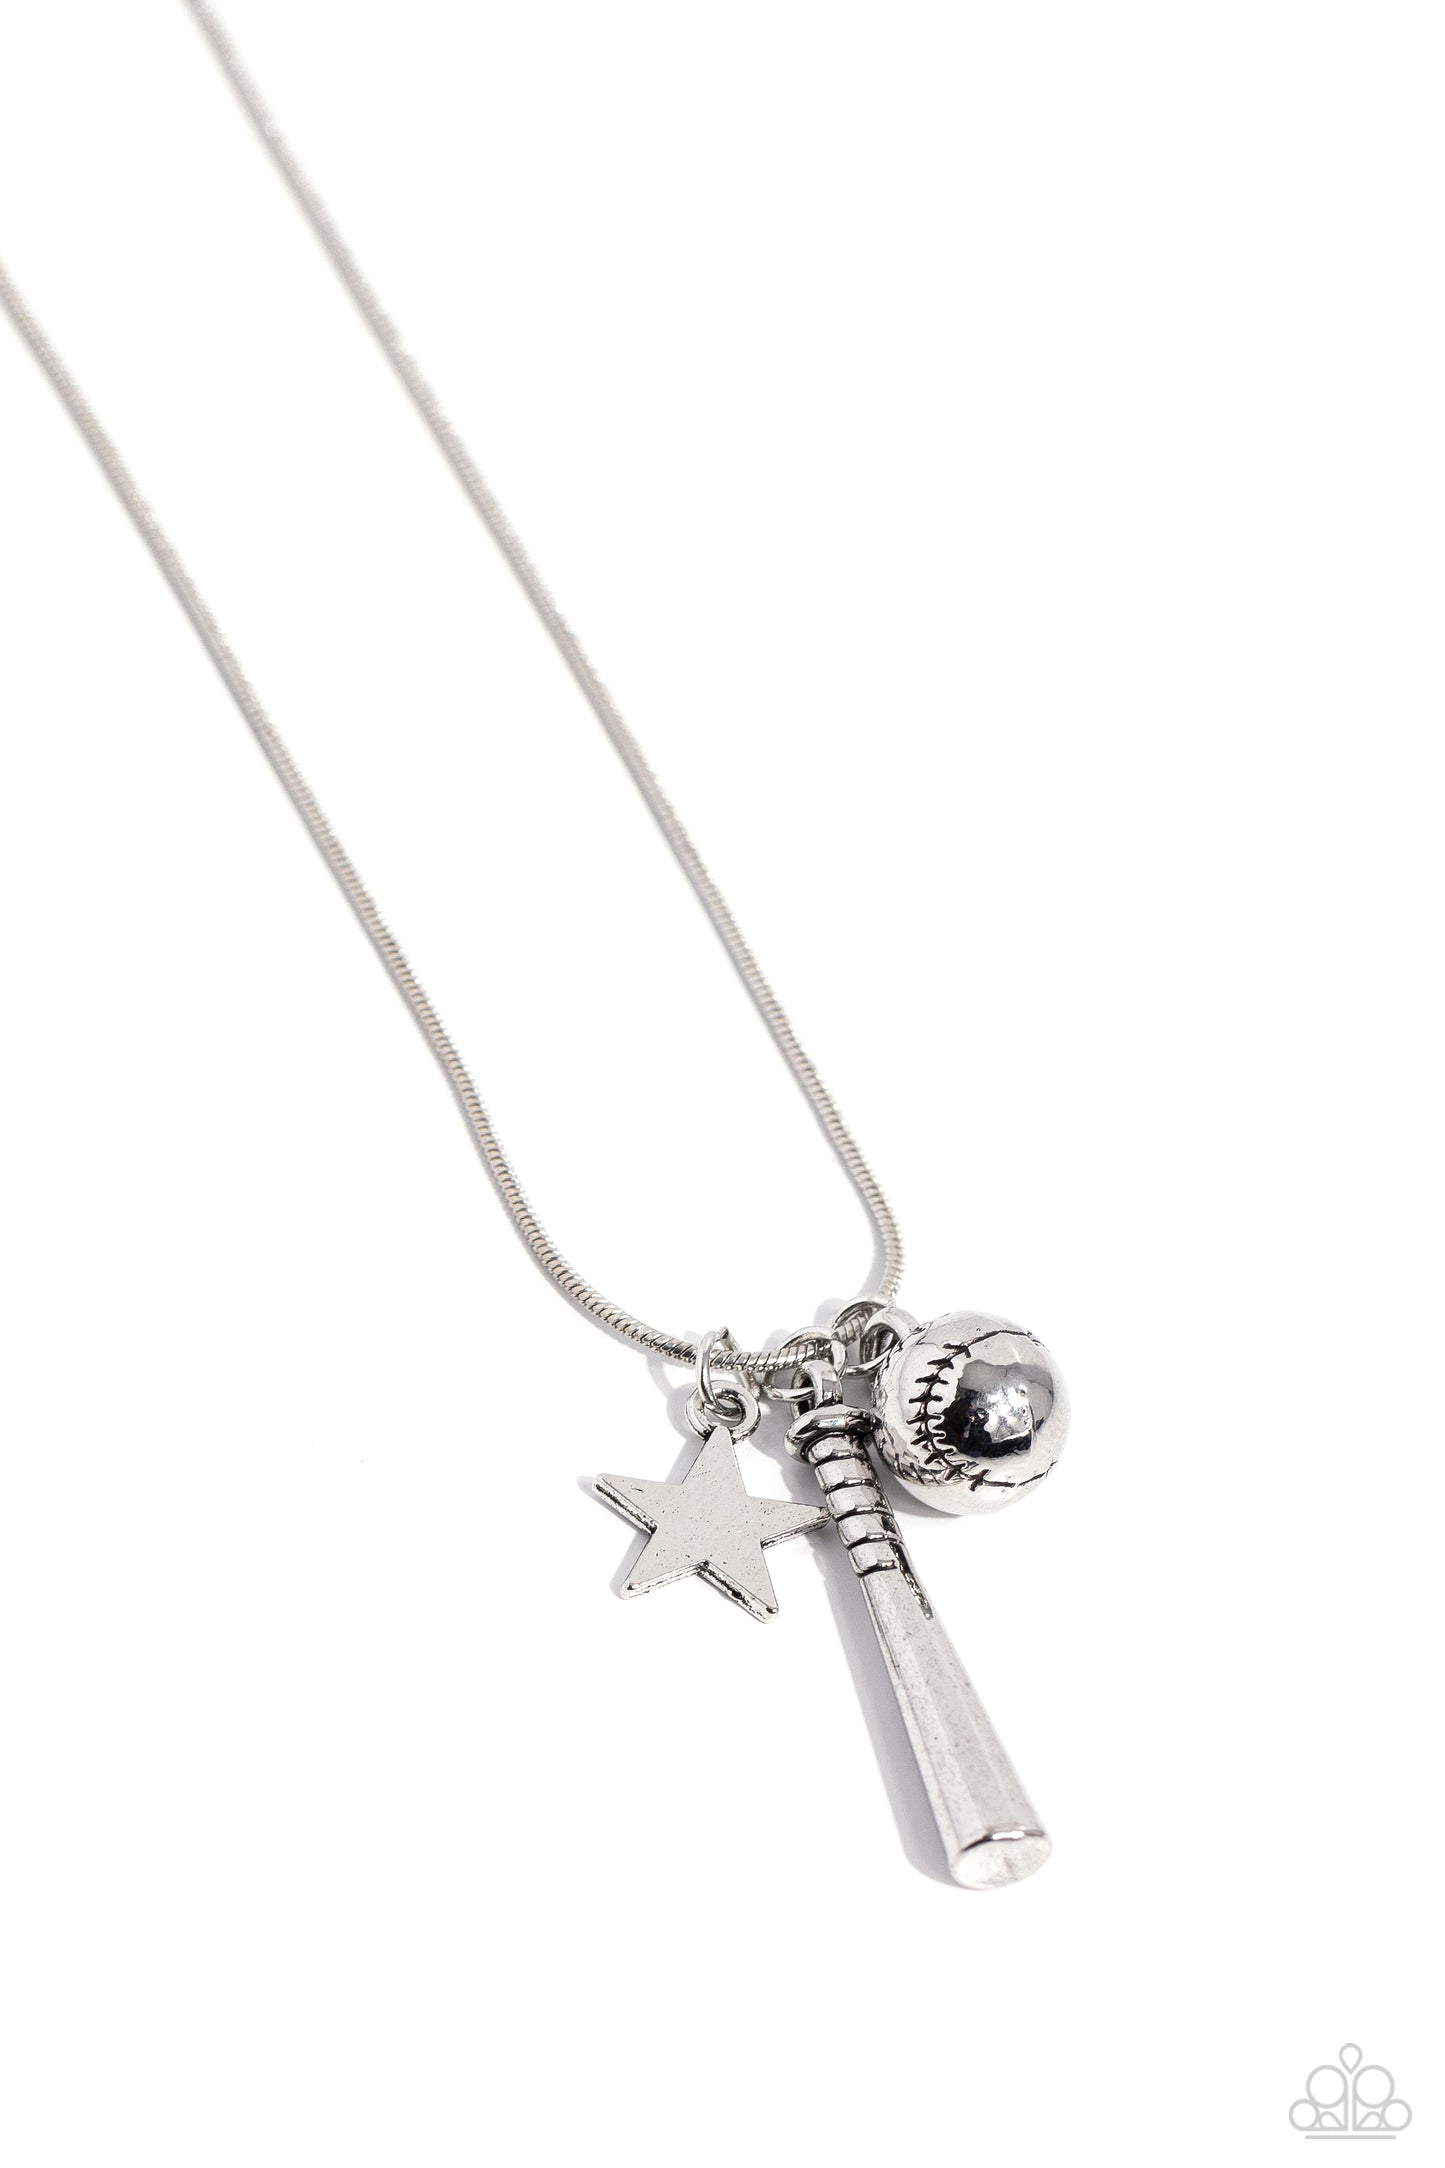 Hey Batter Batter! Silver Baseball Necklace - Paparazzi Accessories  An assortment of charms, including a star, baseball, and baseball bat, glide along a dainty silver snake chain, creating a simply sporty display below the collar. Features an adjustable clasp closure.  Sold as one individual necklace. Includes one pair of matching earrings.  P2WH-SVXX-377XX